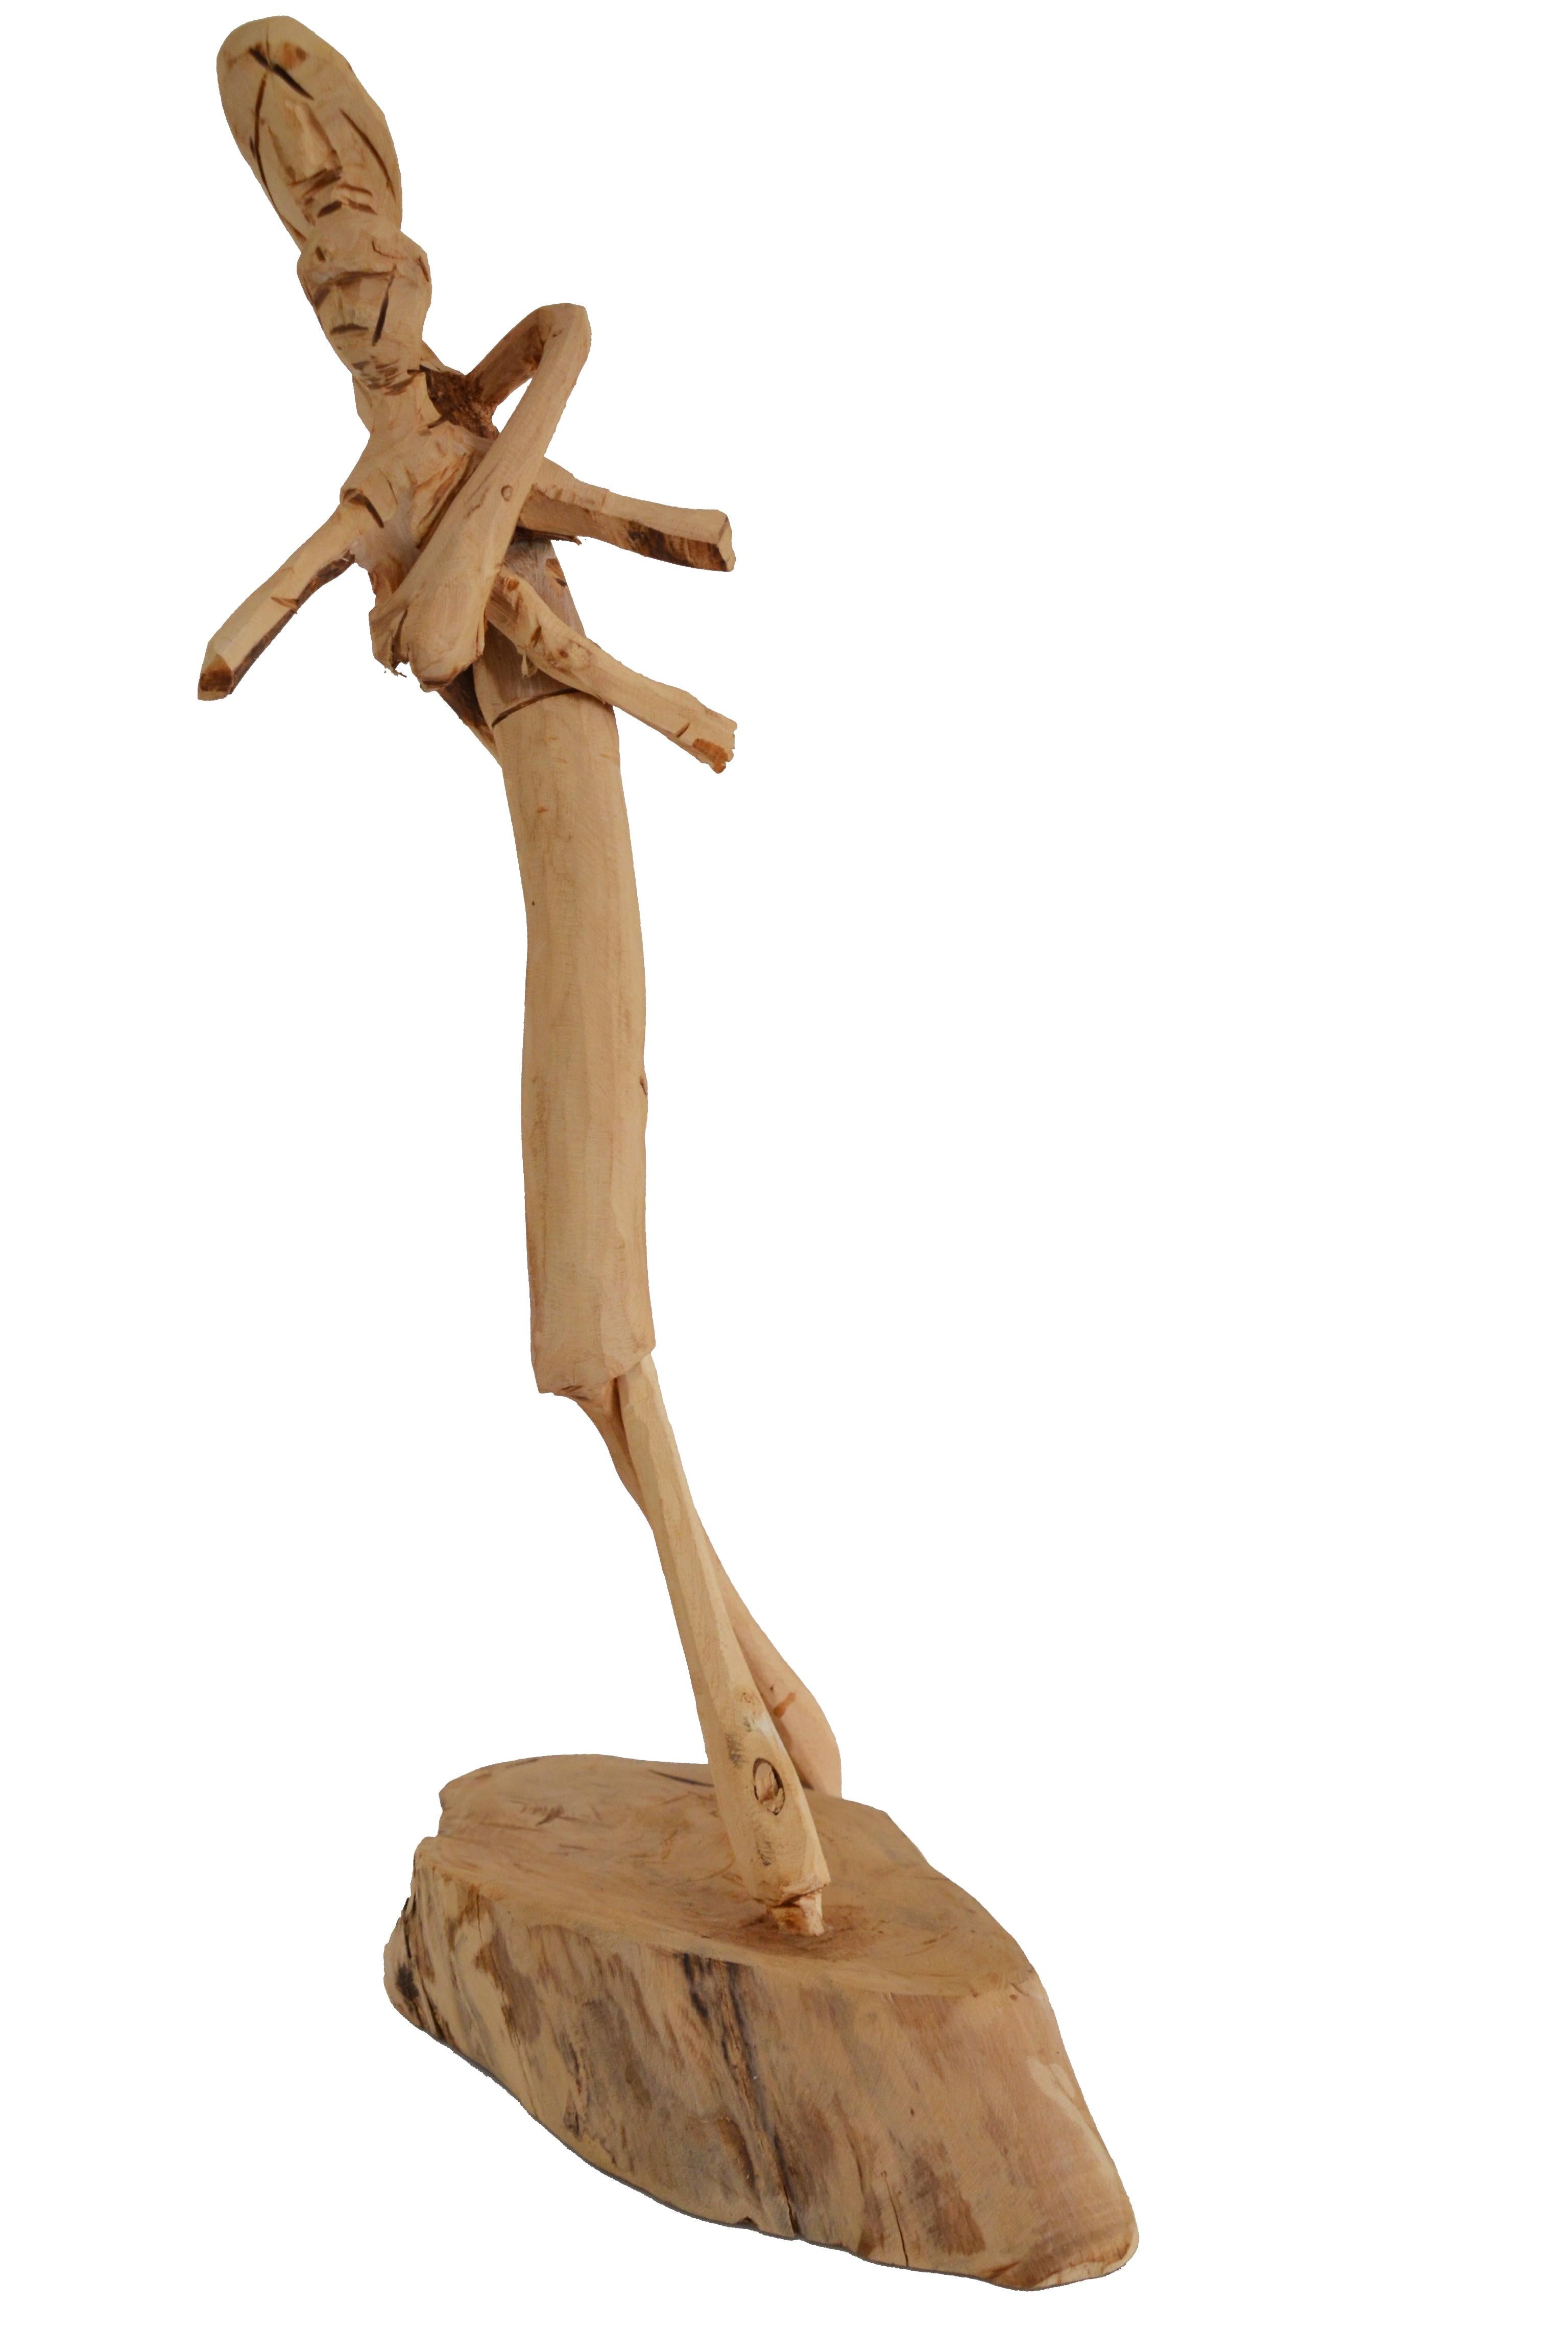 “Mother with Son” (originally entitled “Mulher com Filho”) is a unique piece by the Brazilian artist Cícero Rodrigues, from Petrolina, Pernambuco. Through the wood-carving, the artist manages to express the simultaneous roughness and simplicity of